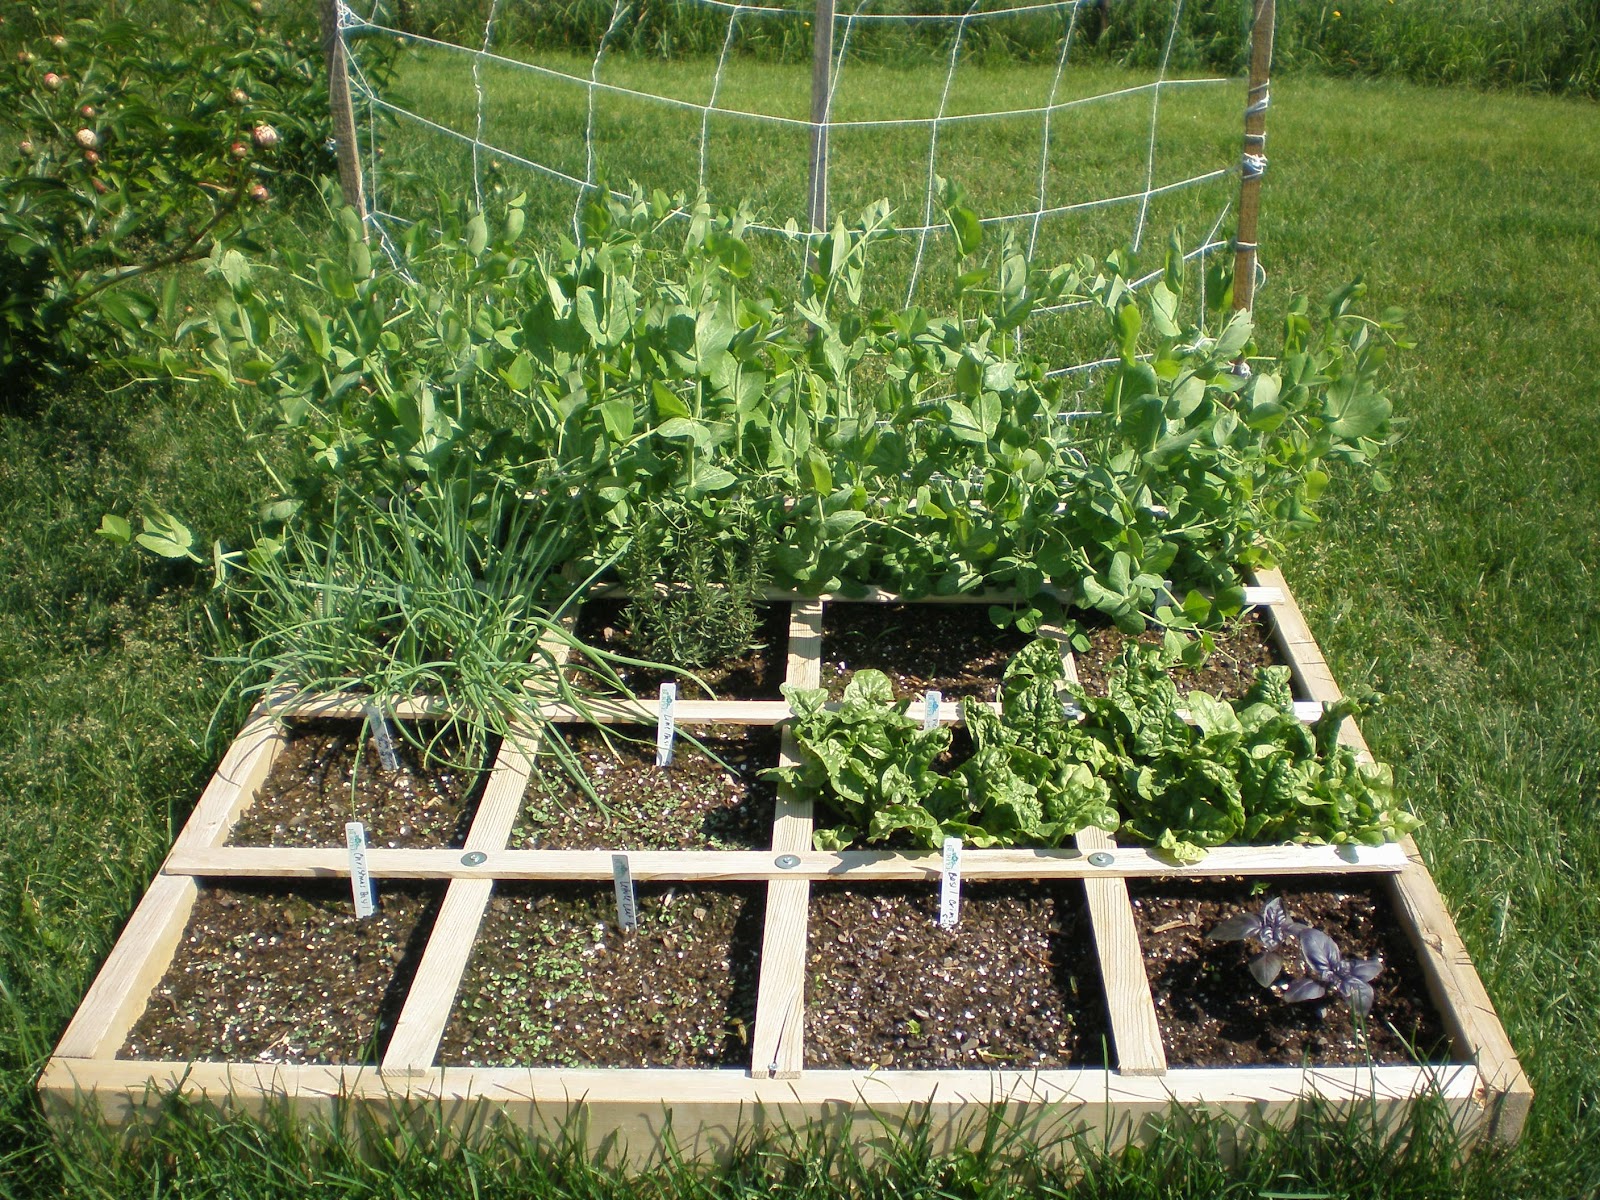 Three Strands Together: Square Foot Gardening in Action